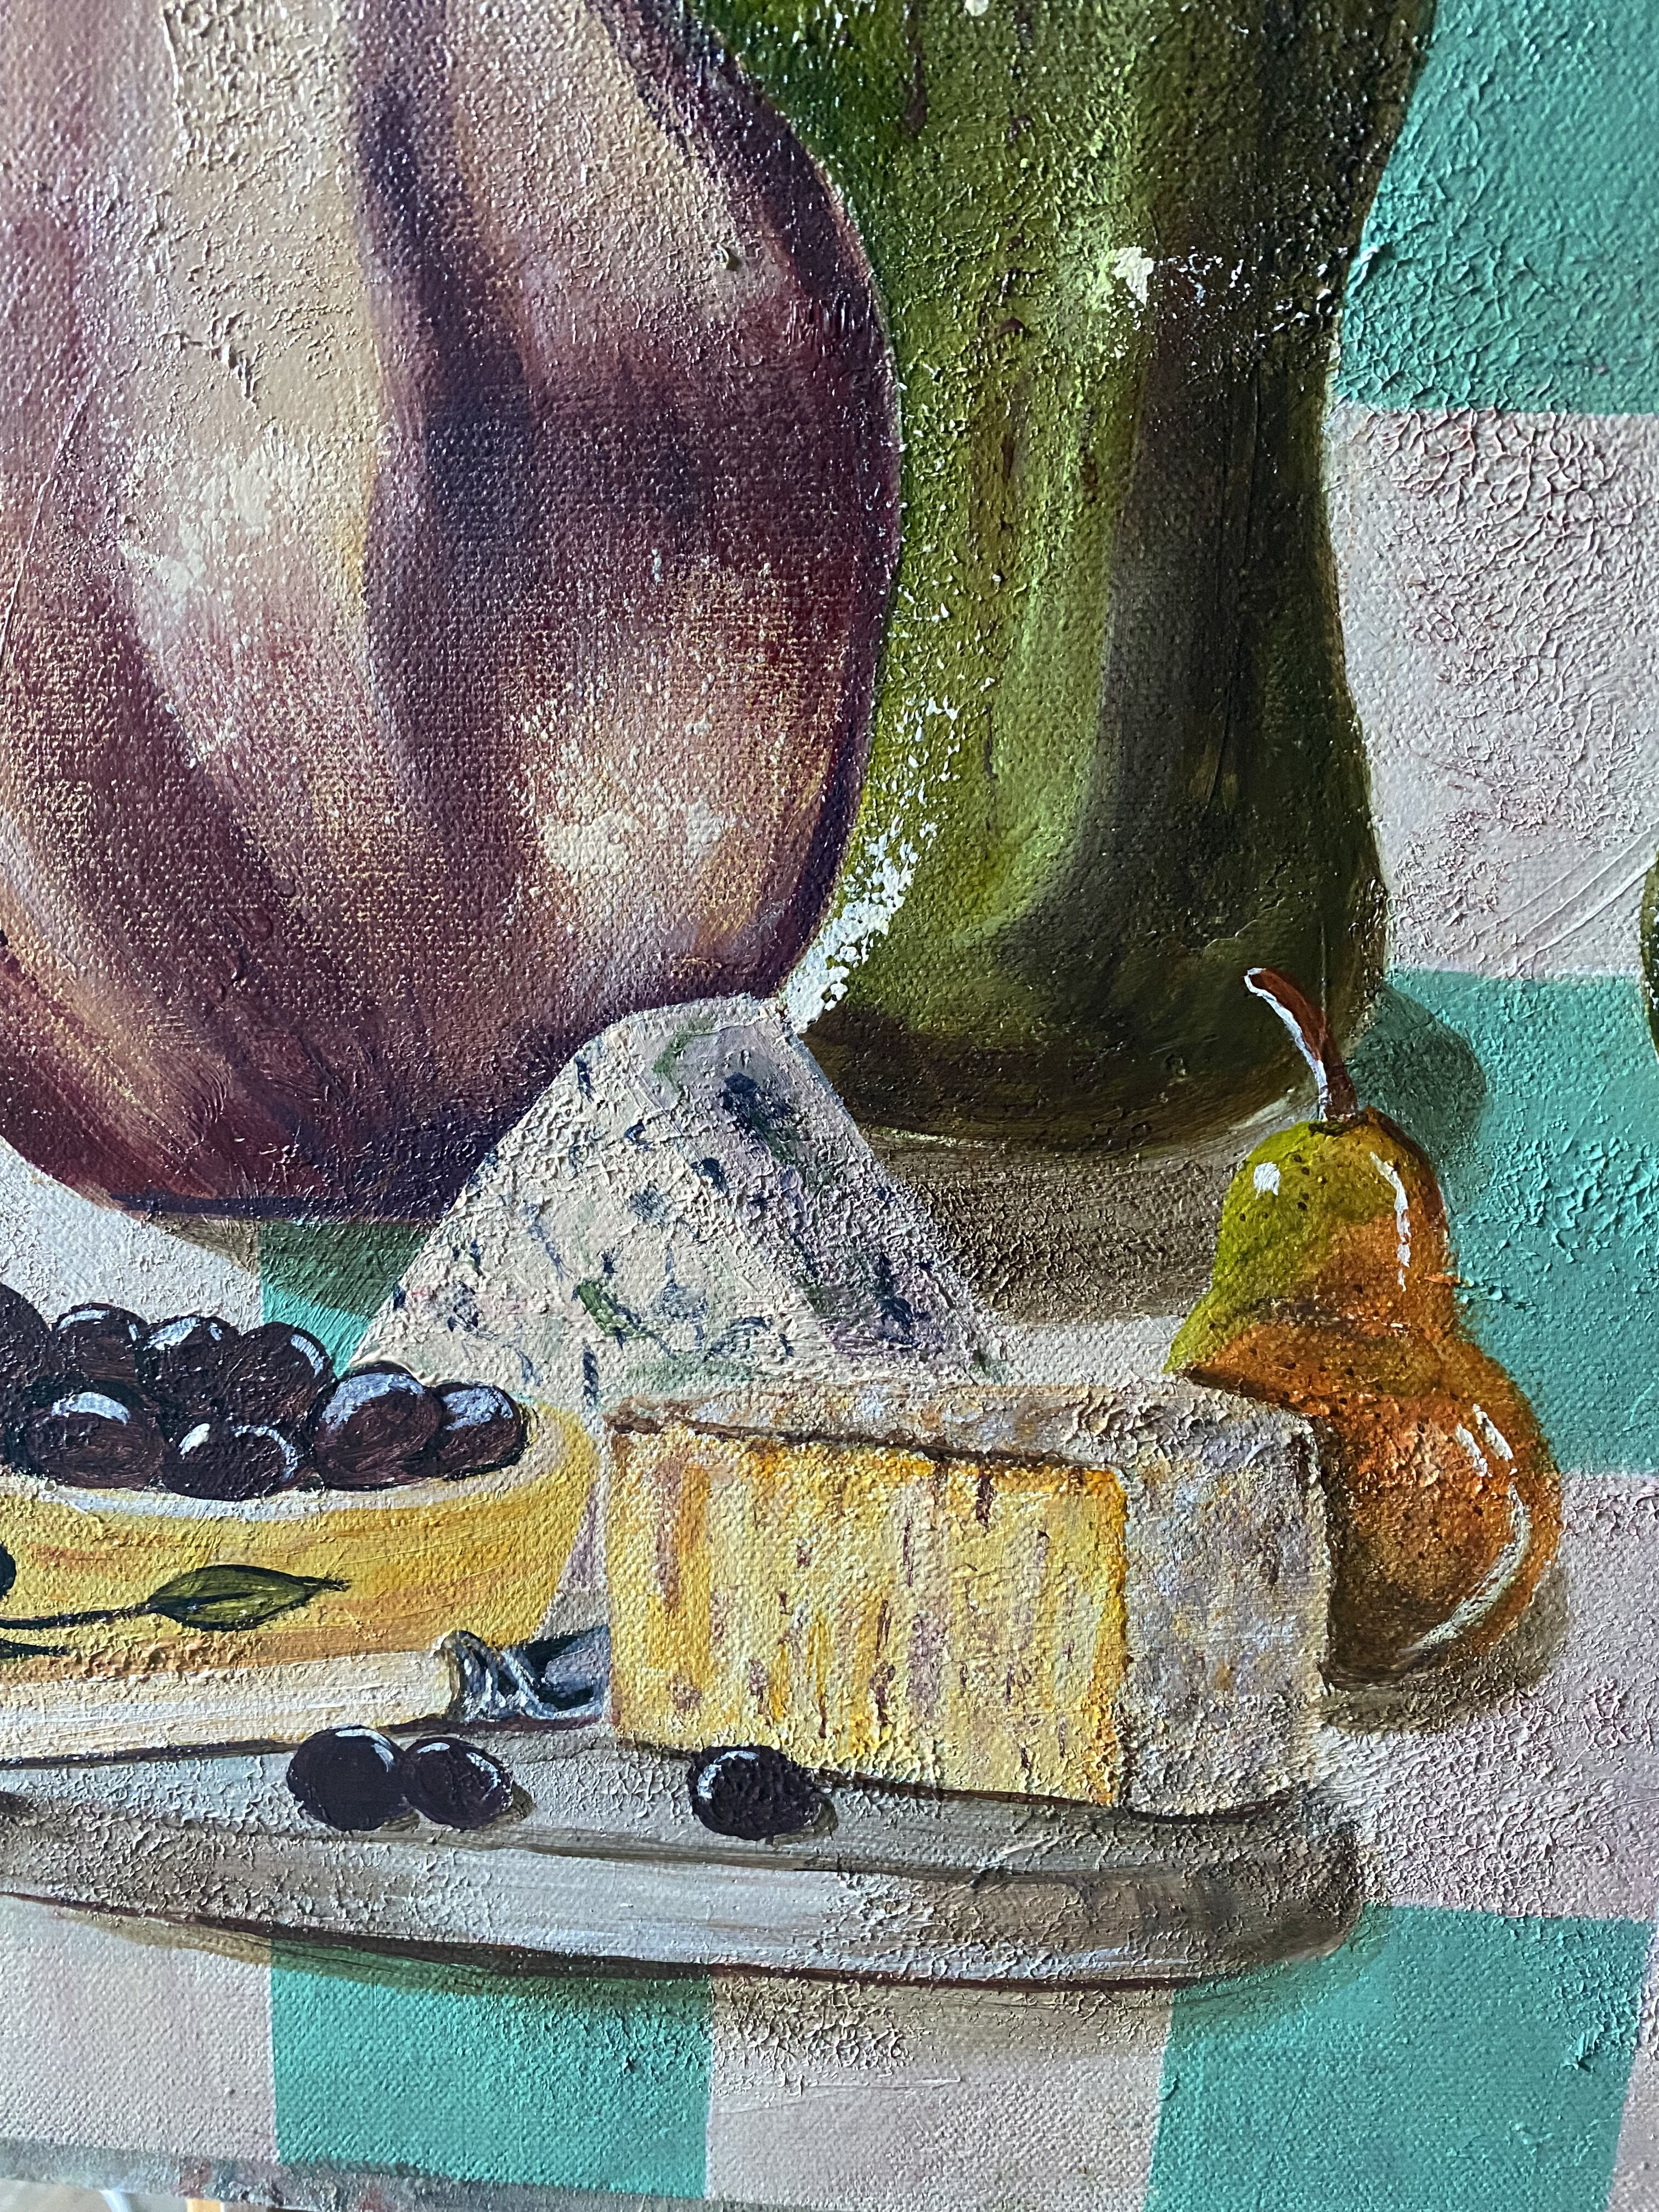 Pears_and_Blue_Cheese_closeup2_Wendy_Peters